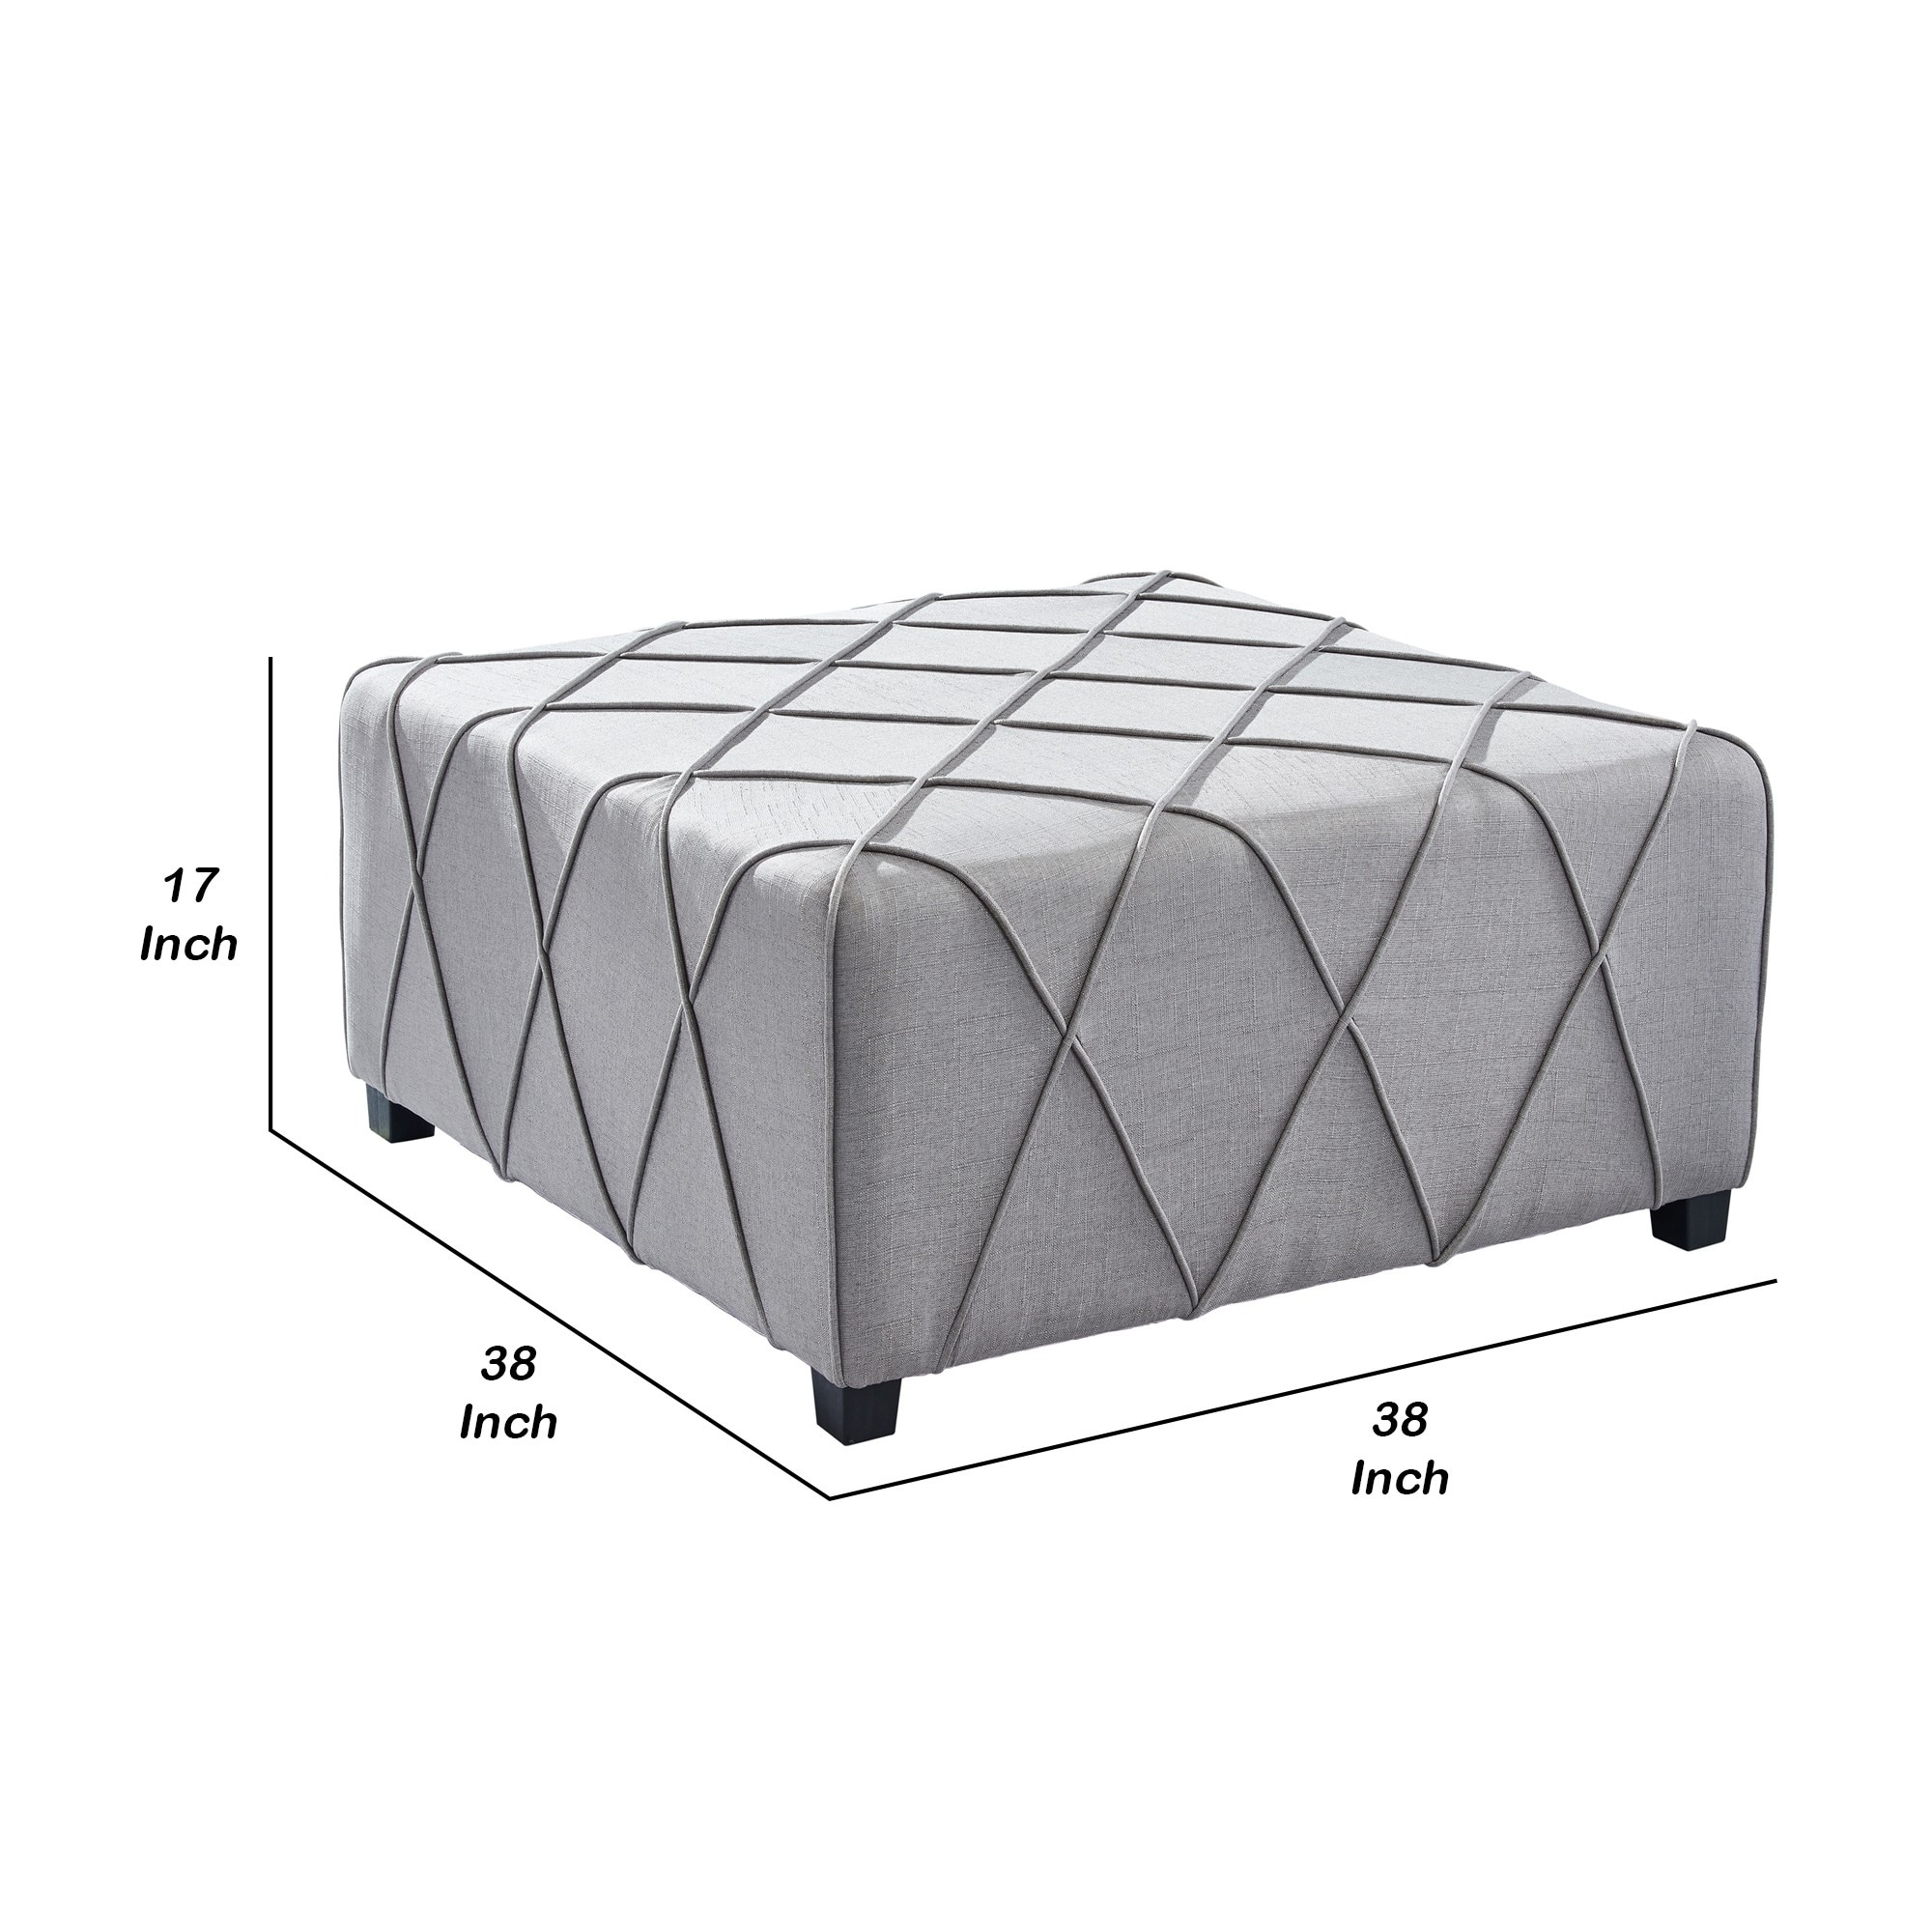 17 Inch Fabric Ottoman with Piping Details, Light Gray